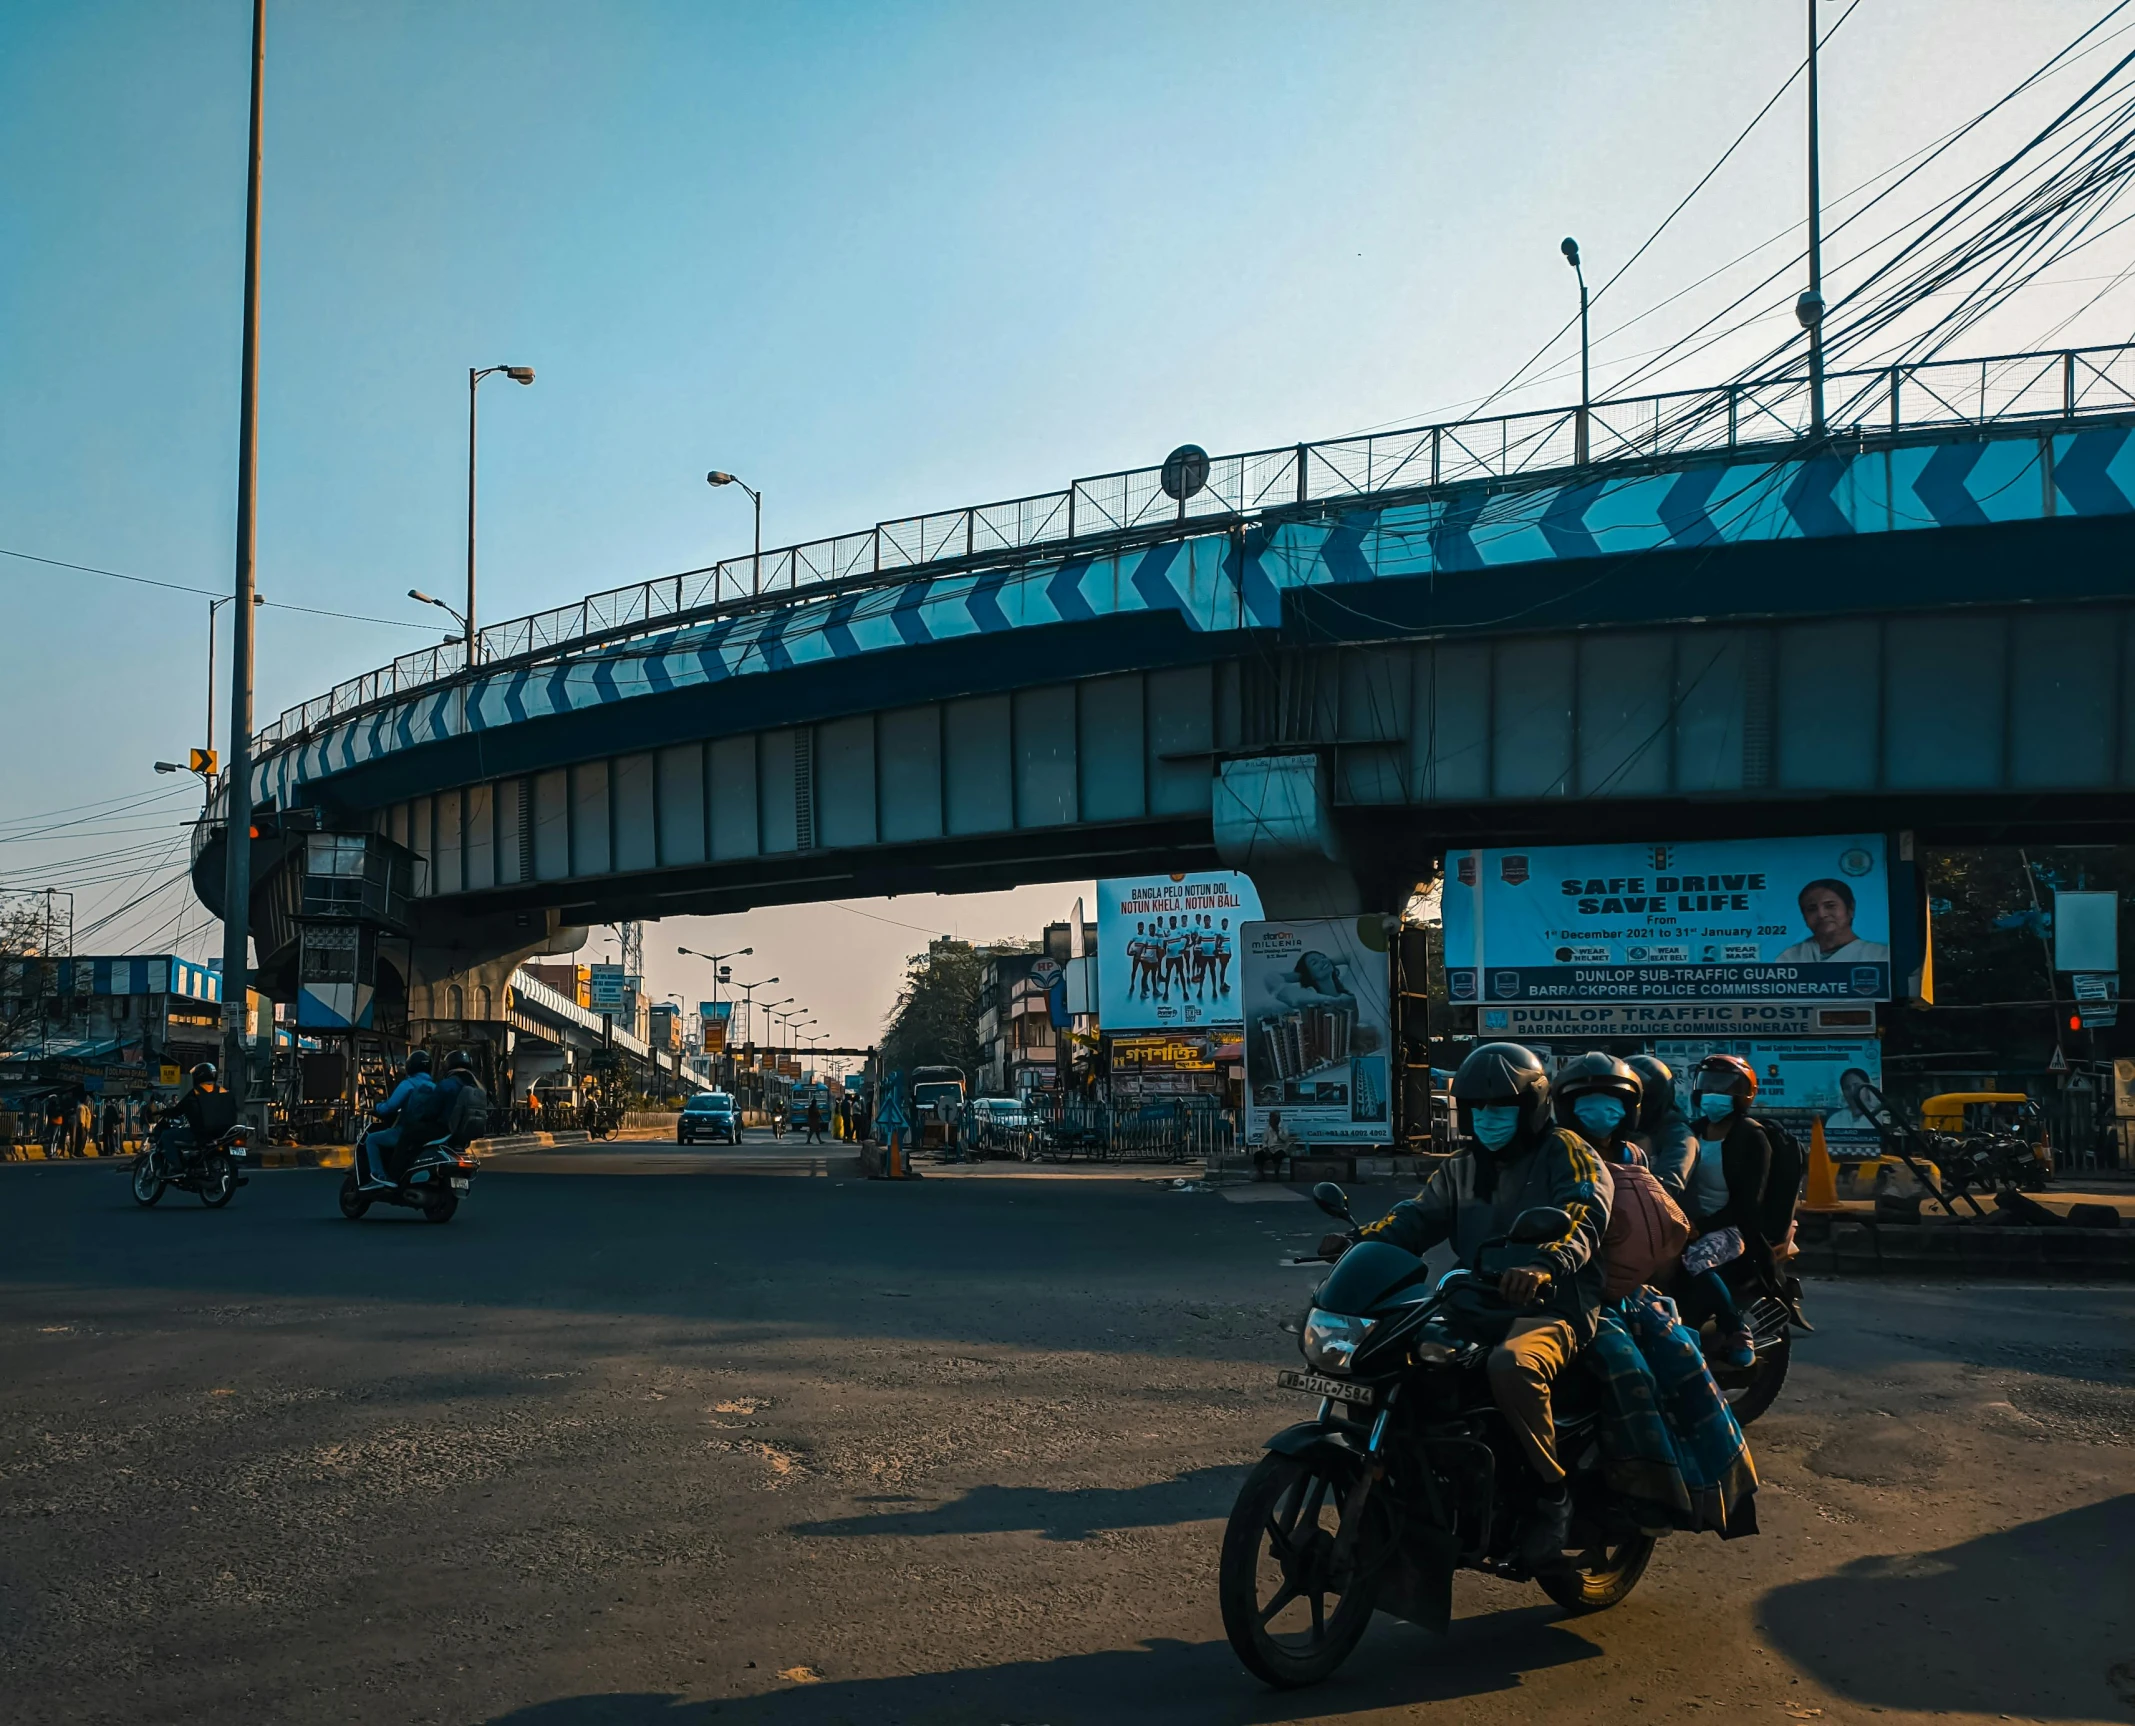 the motorcyclists are waiting at the traffic light to cross the bridge